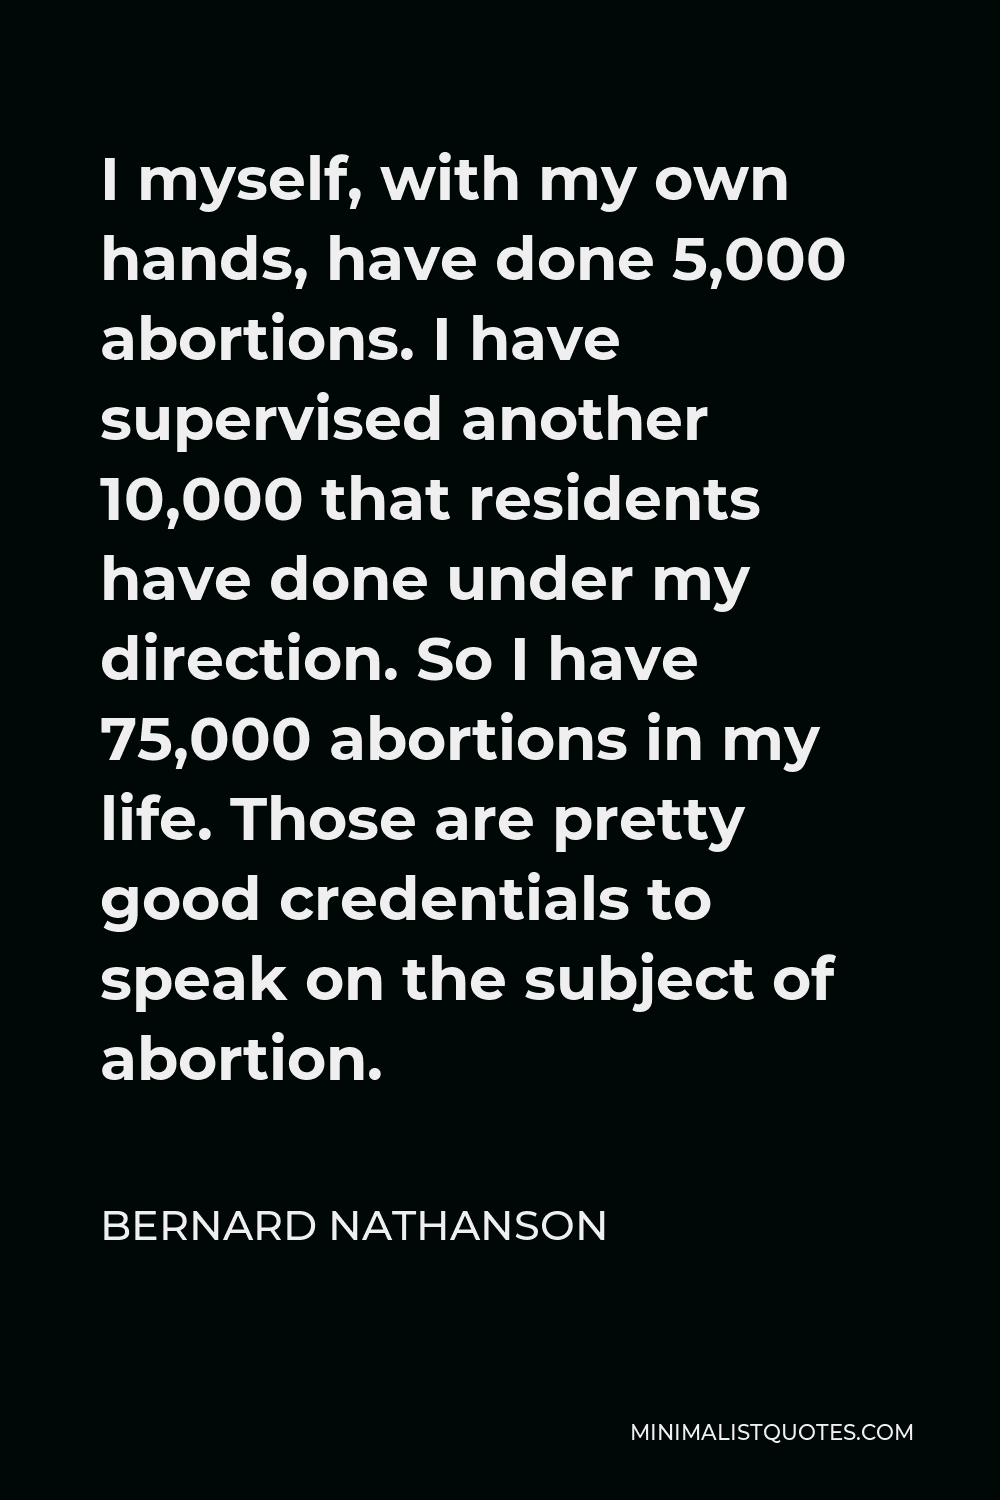 Bernard Nathanson Quote - I myself, with my own hands, have done 5,000 abortions. I have supervised another 10,000 that residents have done under my direction. So I have 75,000 abortions in my life. Those are pretty good credentials to speak on the subject of abortion.